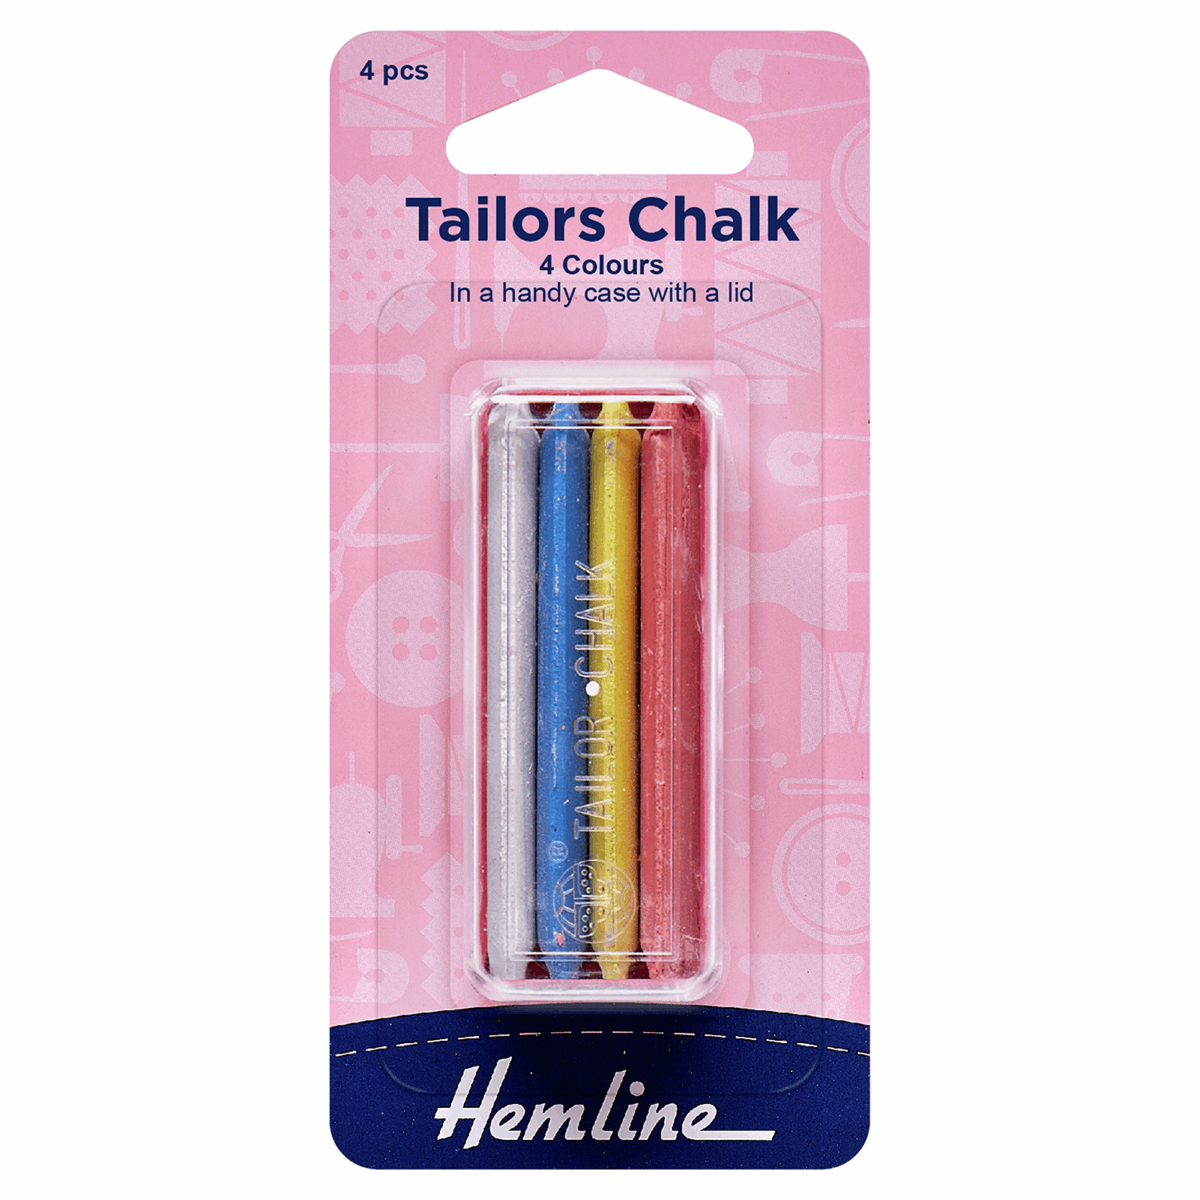 Tailors Chalk - Pack of 4 Colours